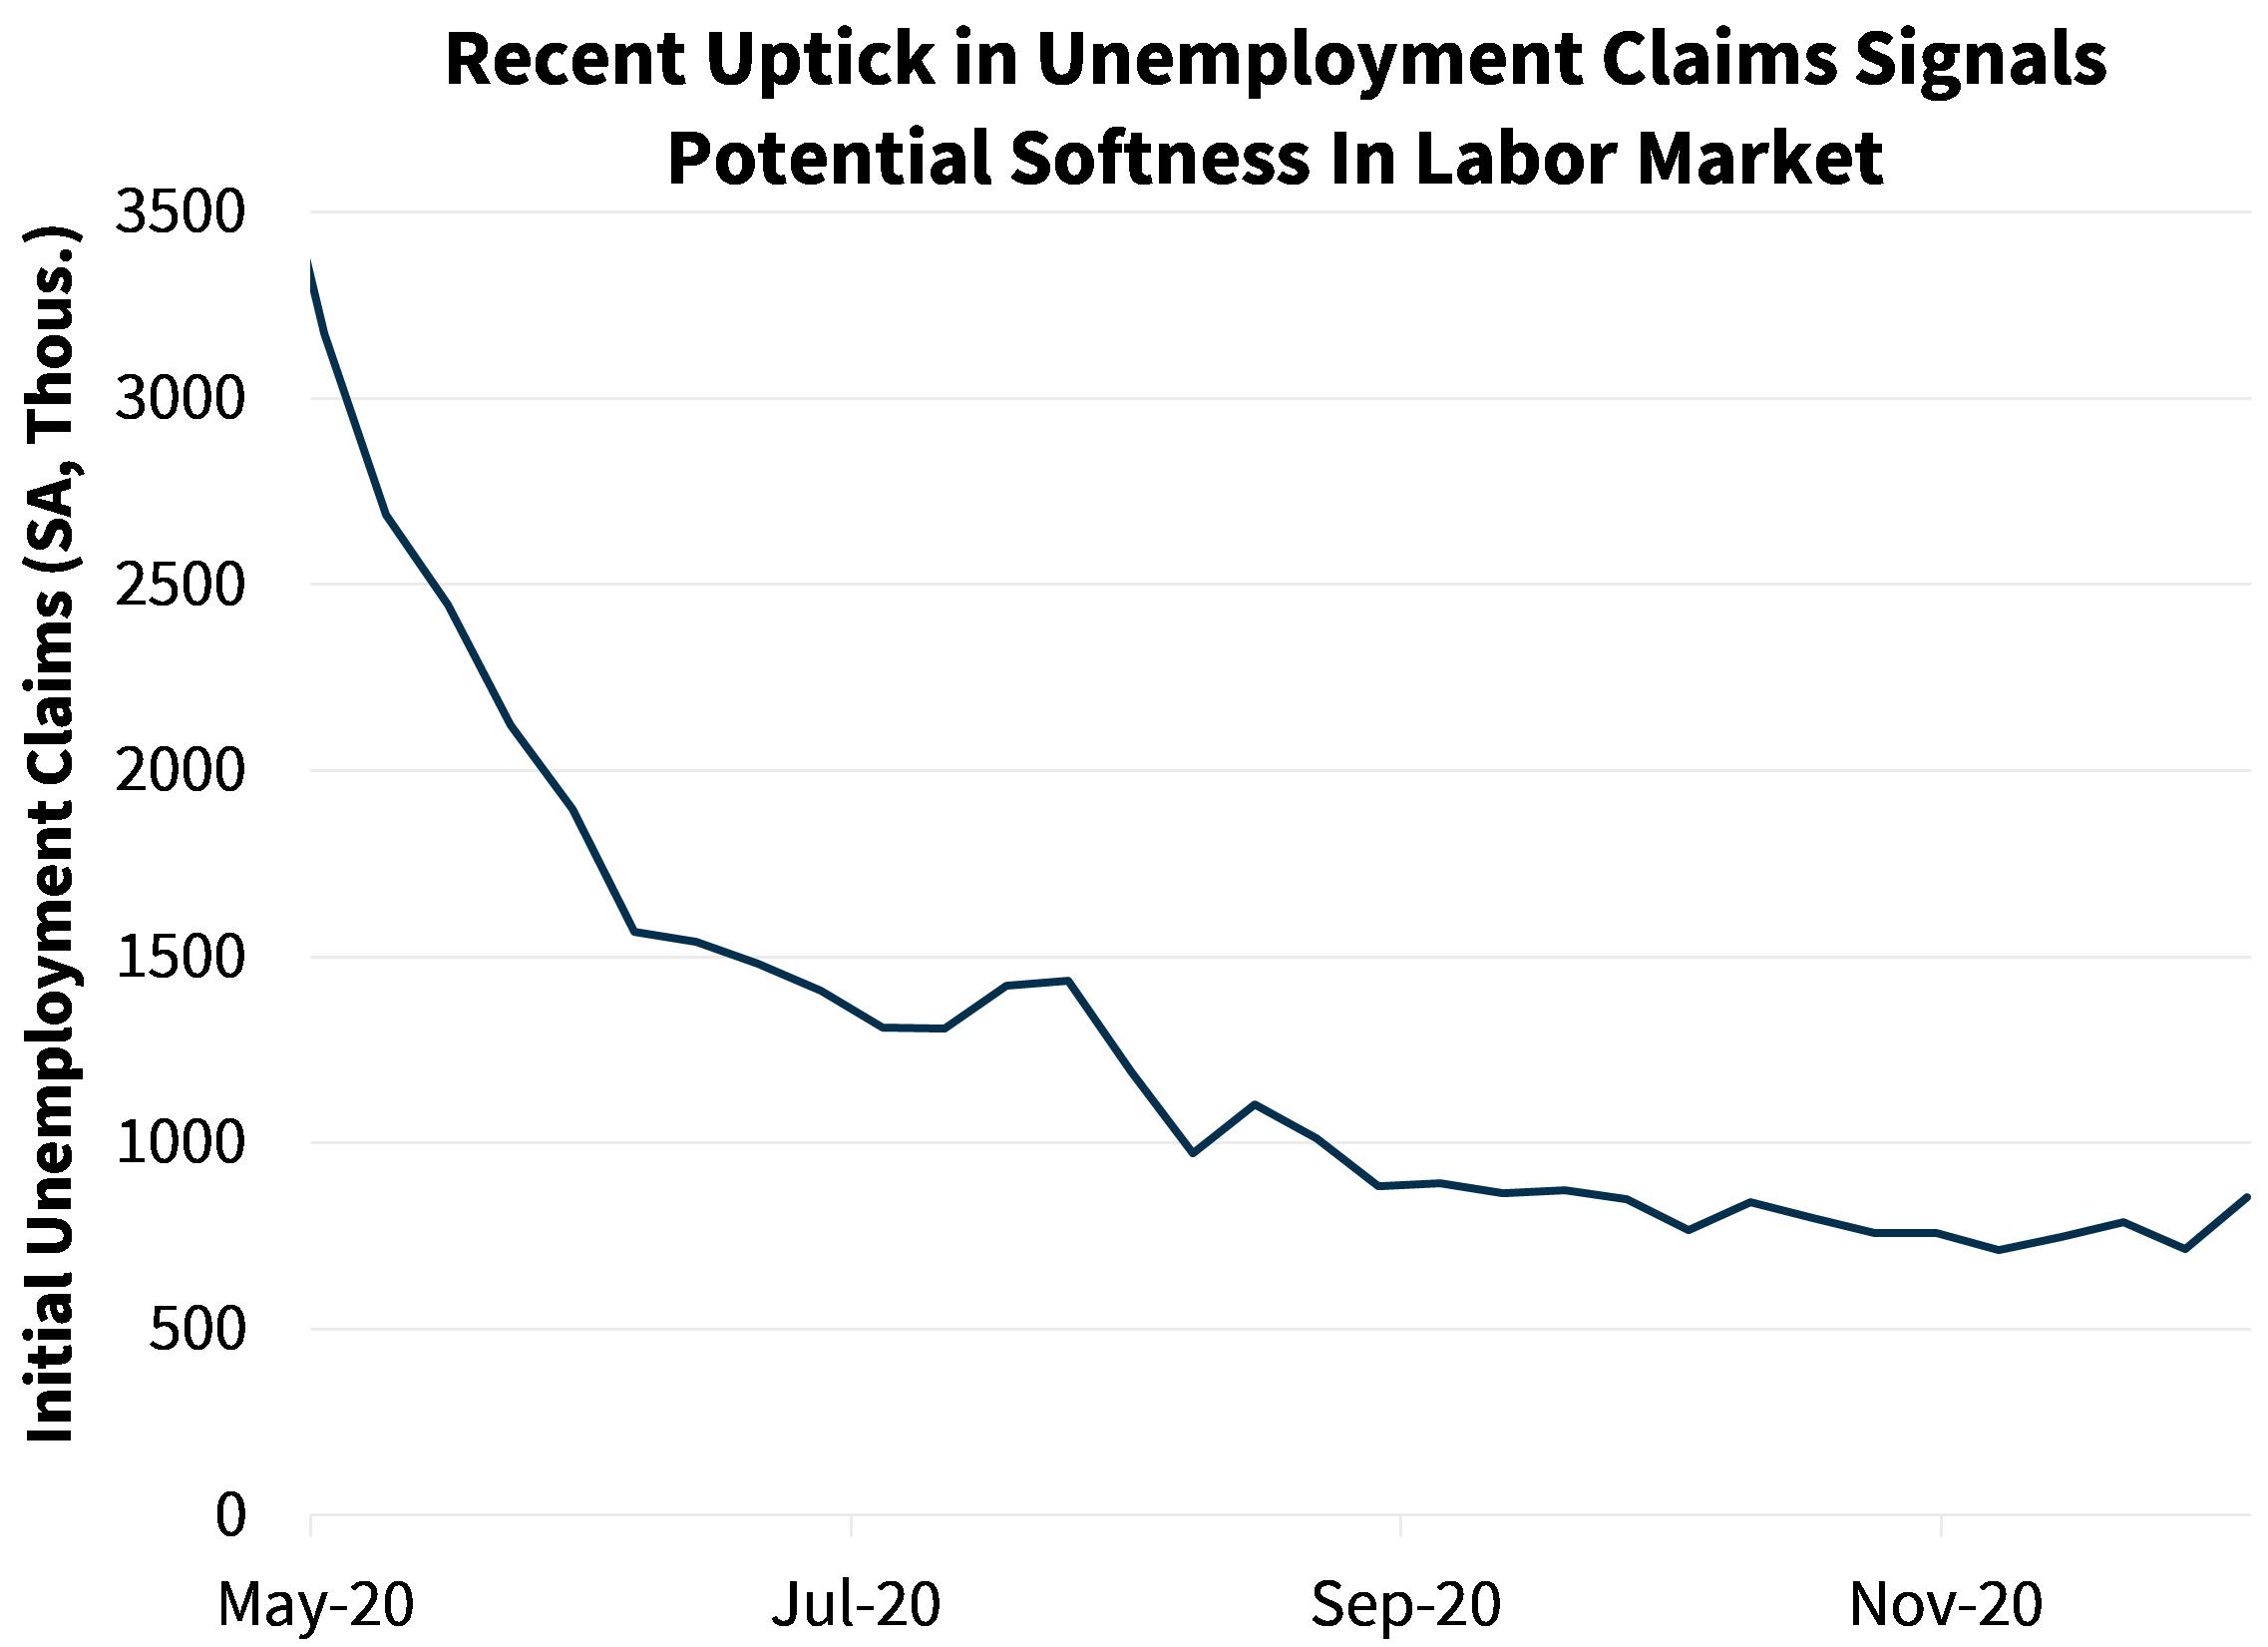  Recent Uptick in Unemployment Claims Signals Potential Softness in Labor Market
